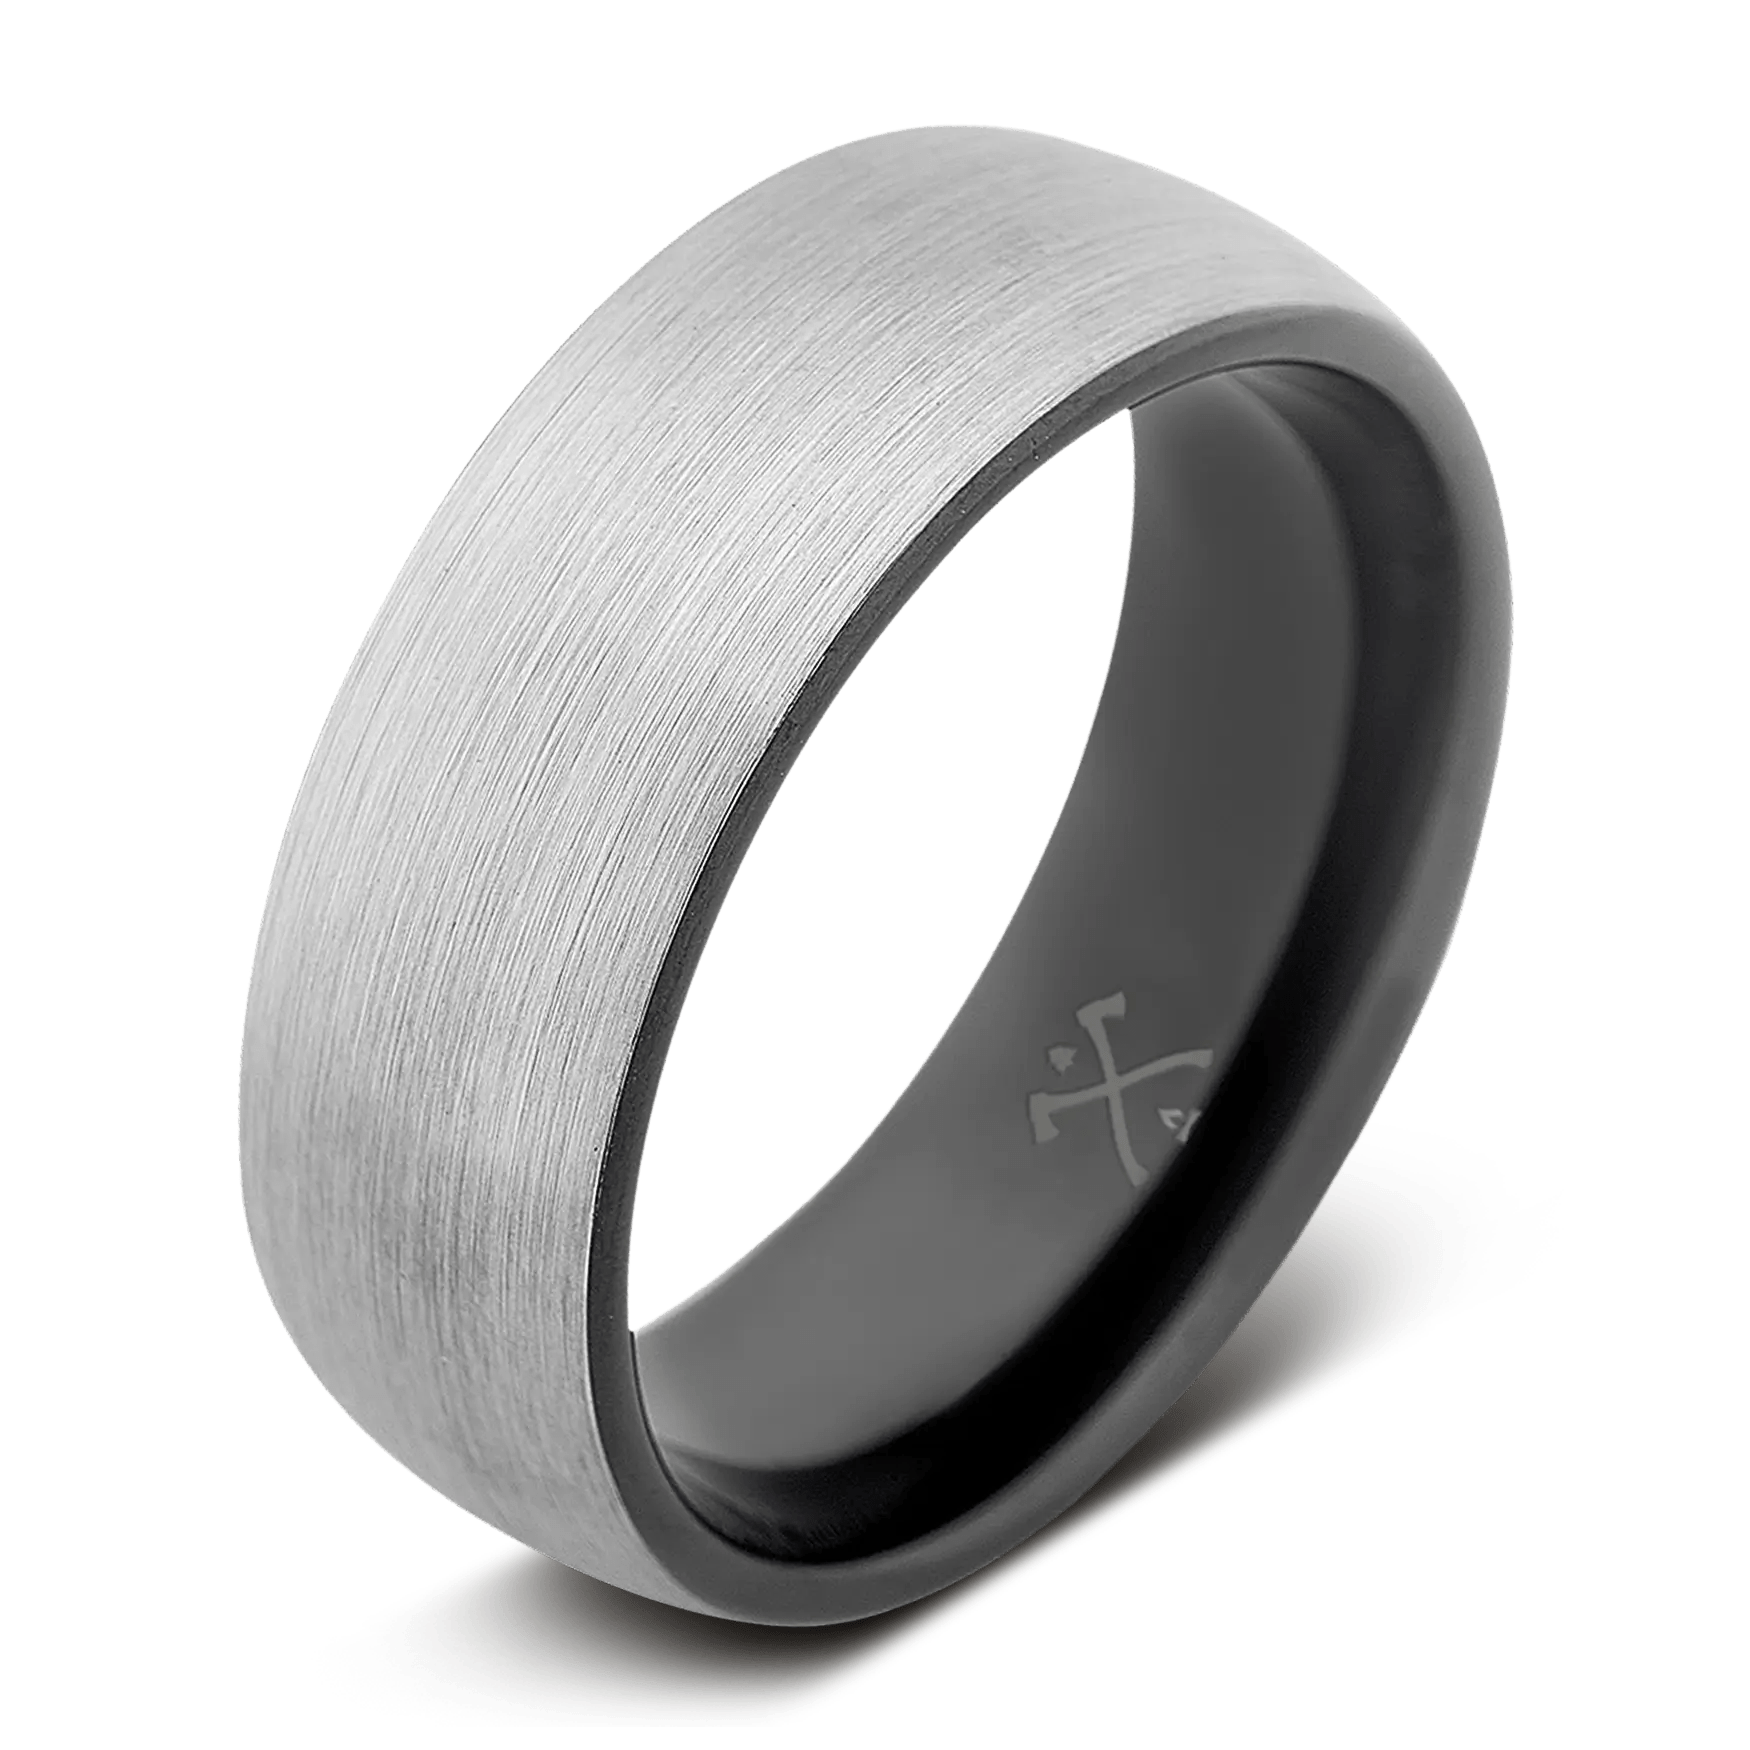 The Rockstar. black ring for men made with tungsten on the outside and black plating on the inside.